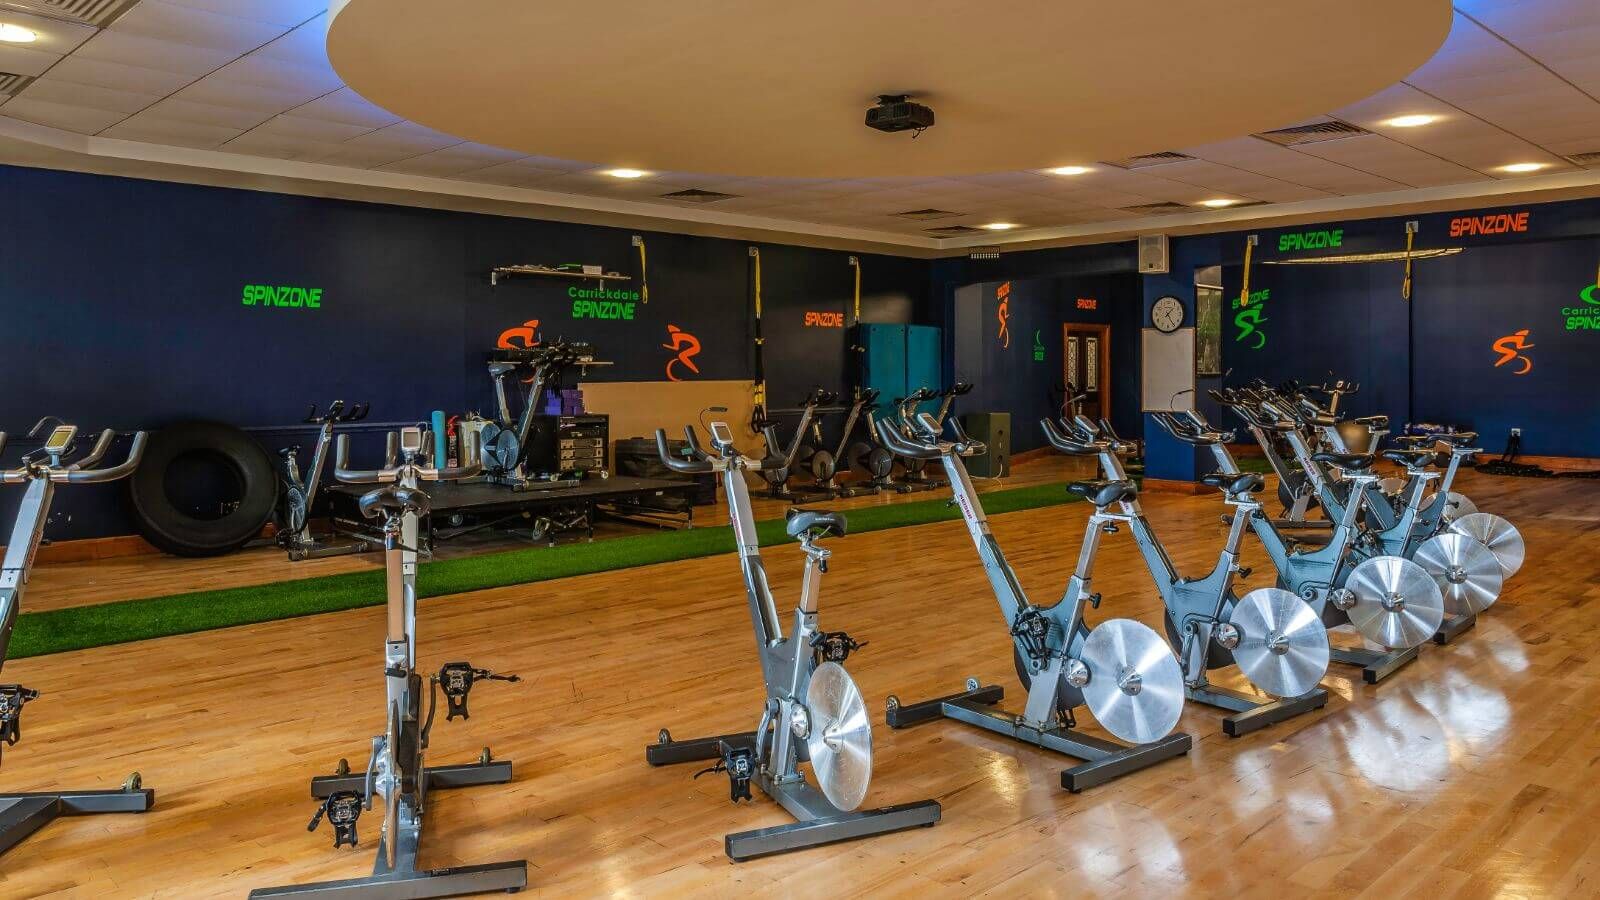 Spinzone at Carrickdale Hotel Leisure Centre